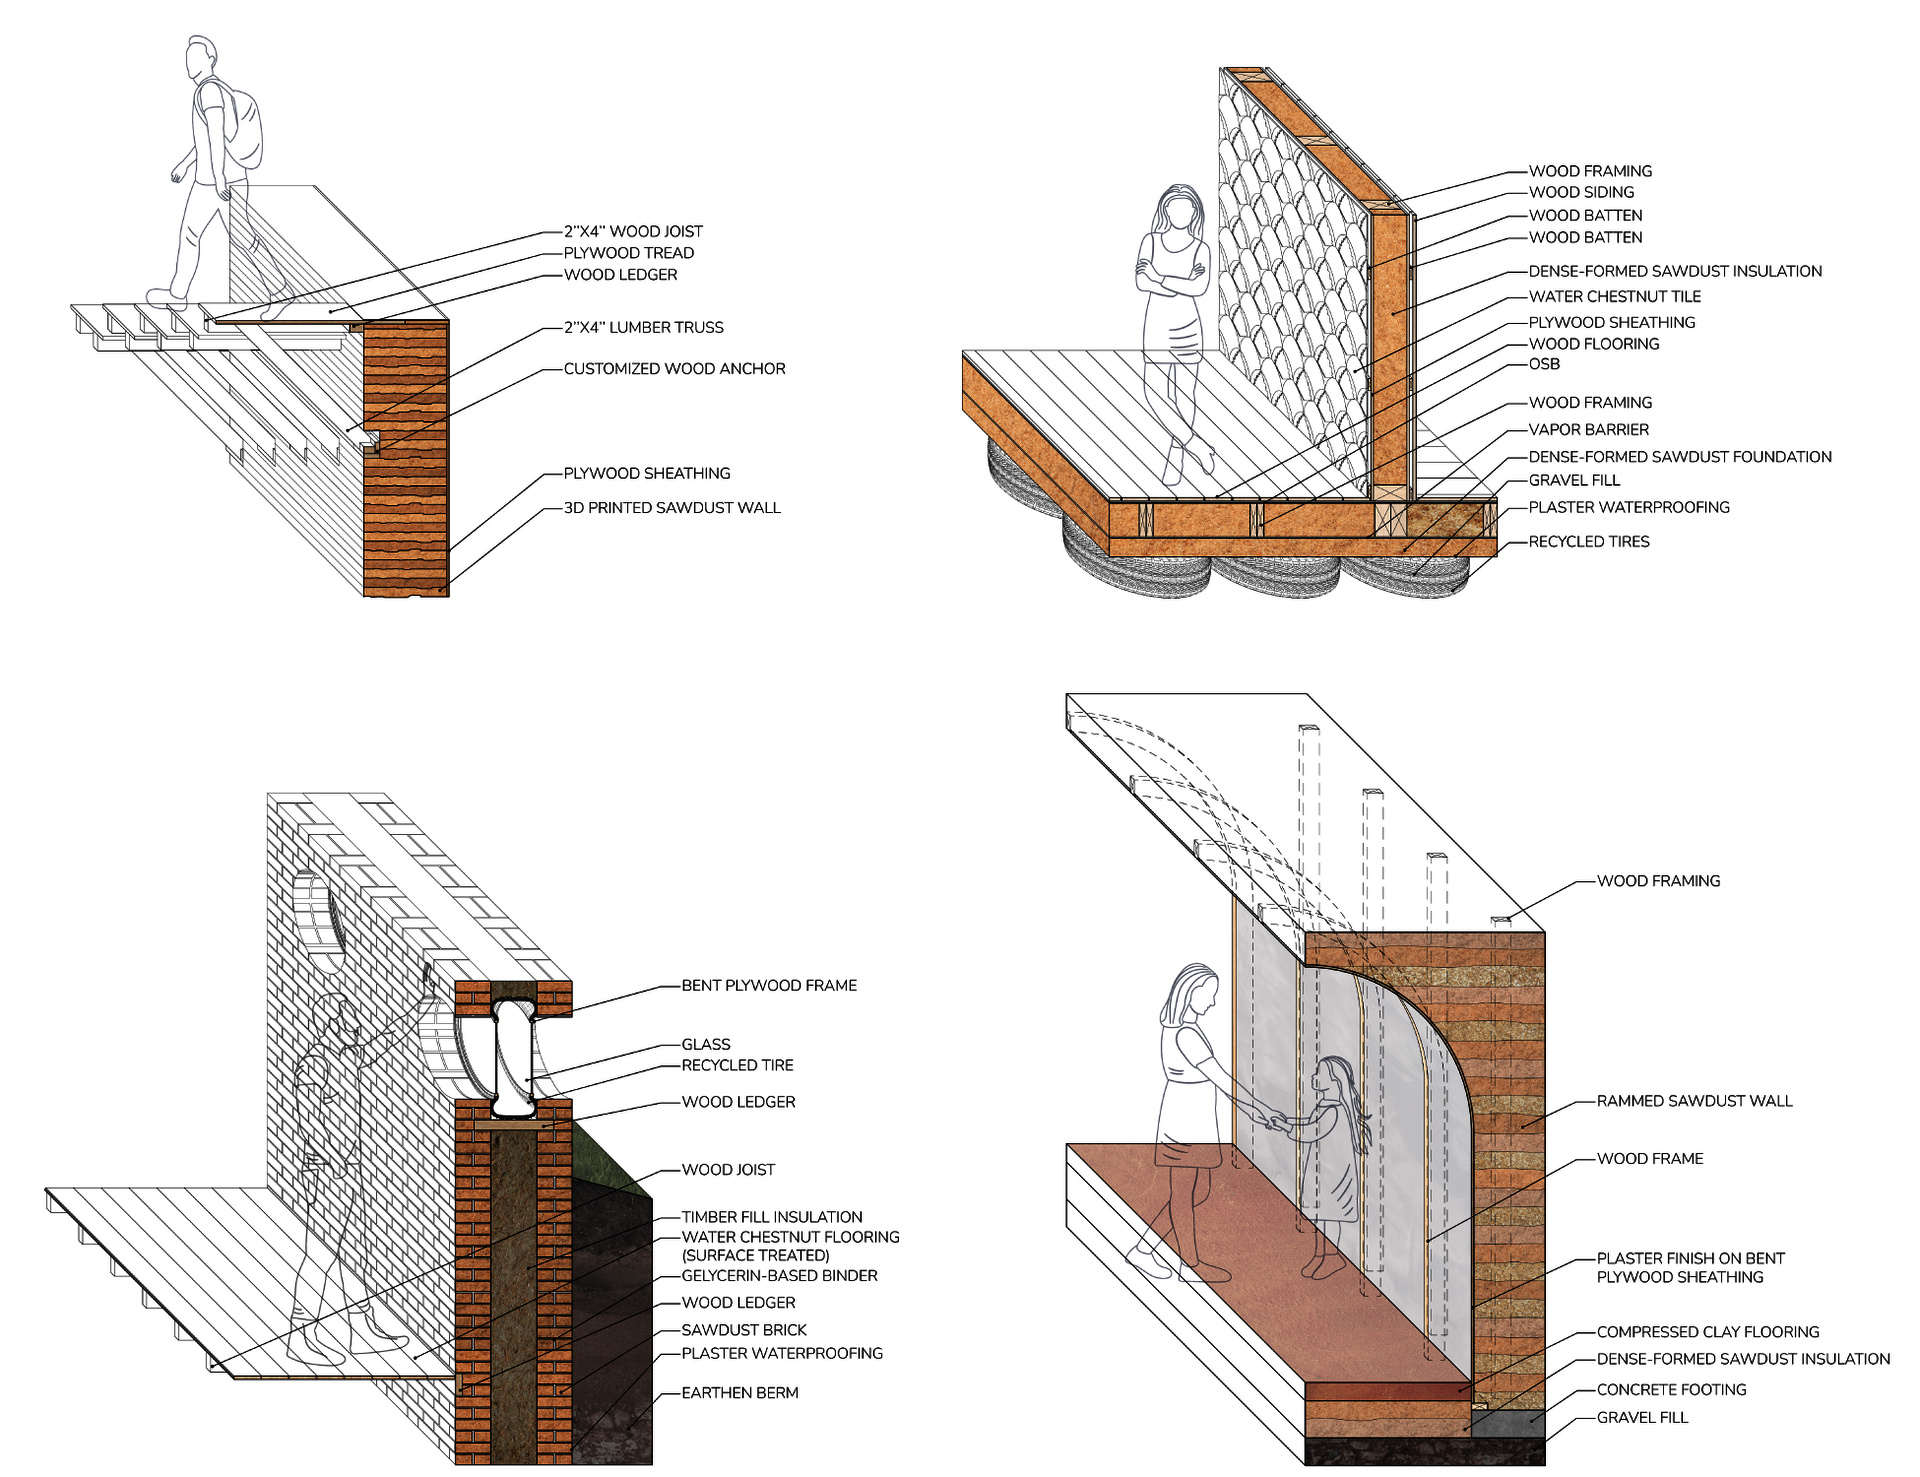 Four architectural tectonic diagrams demonstrate the potential uses of sawdust and water chestnut-based materials: a 3D-printed stair system, a floor-to-wall detail, a masonry system, and a rammed wall detail.